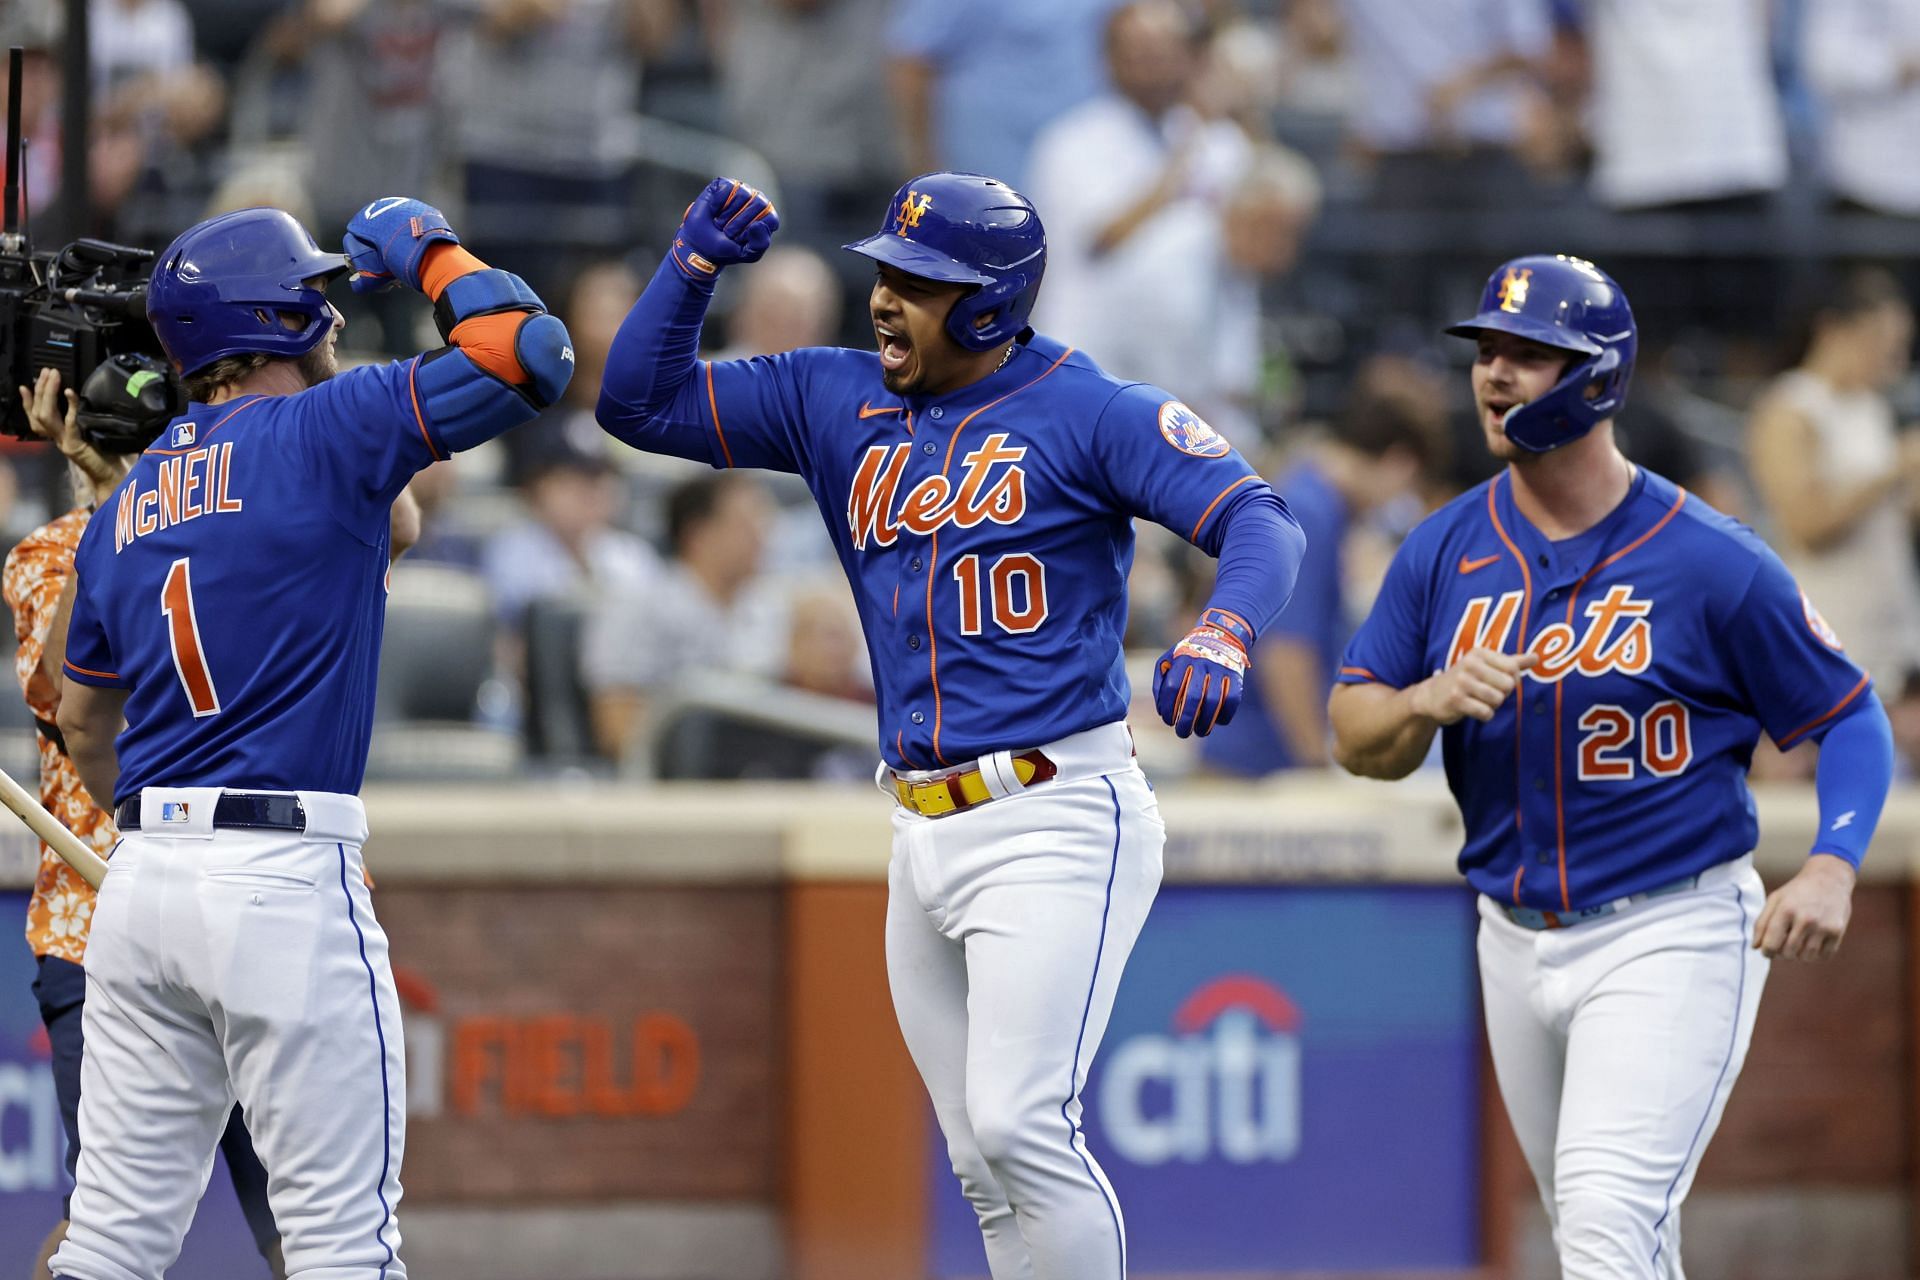 Did Donovan Mitchell Hit A Home Run At Mets Practice?